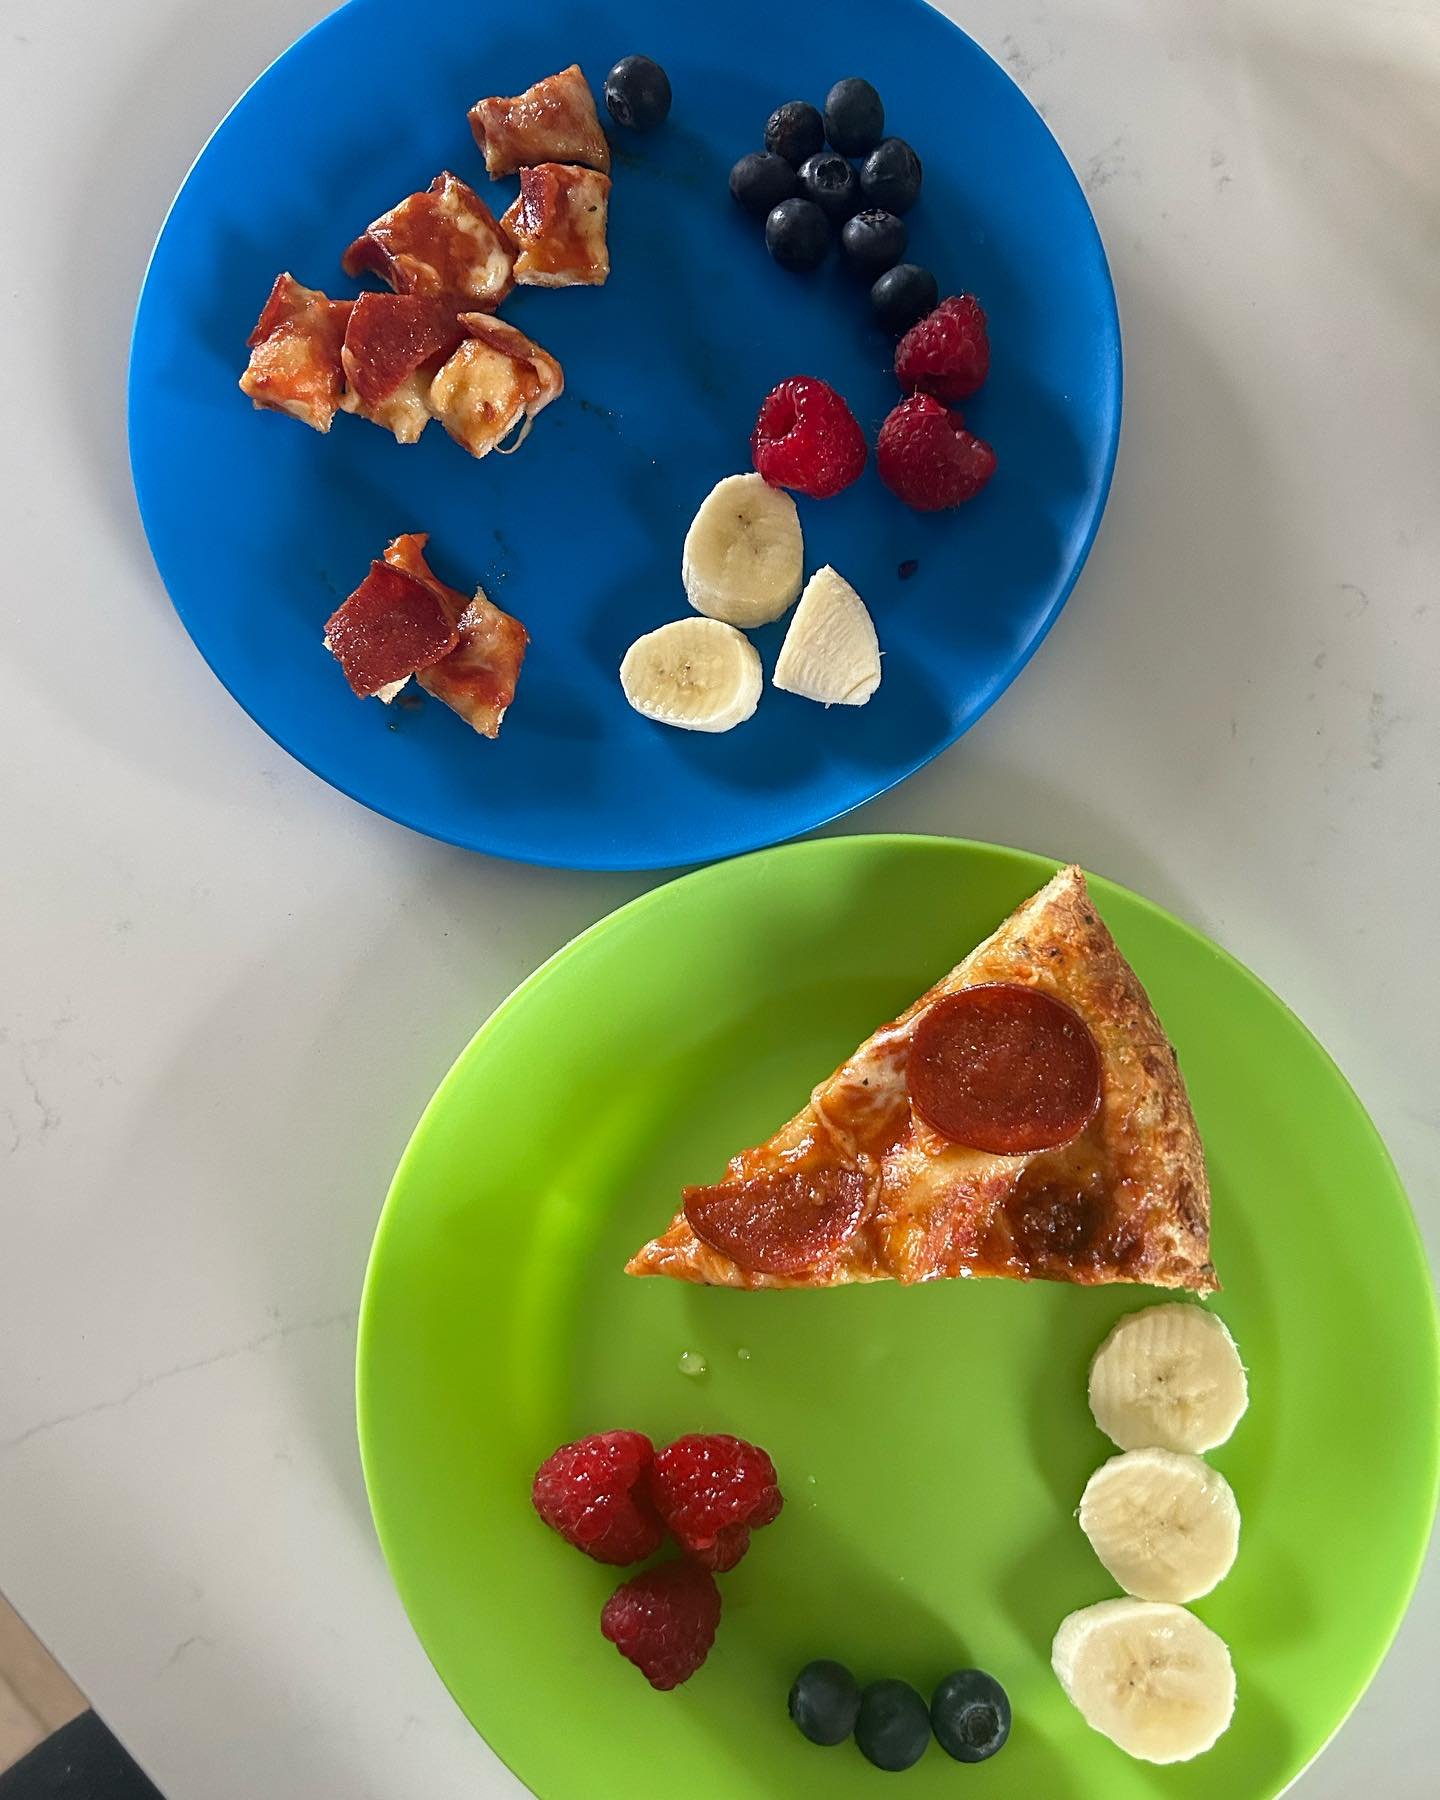 A routine Friday night dinner for the boys over here 🍕 🍌🫐

Who doesn&rsquo;t love a frozen pizza night?! 

Making meals simple for your family is always the goal!